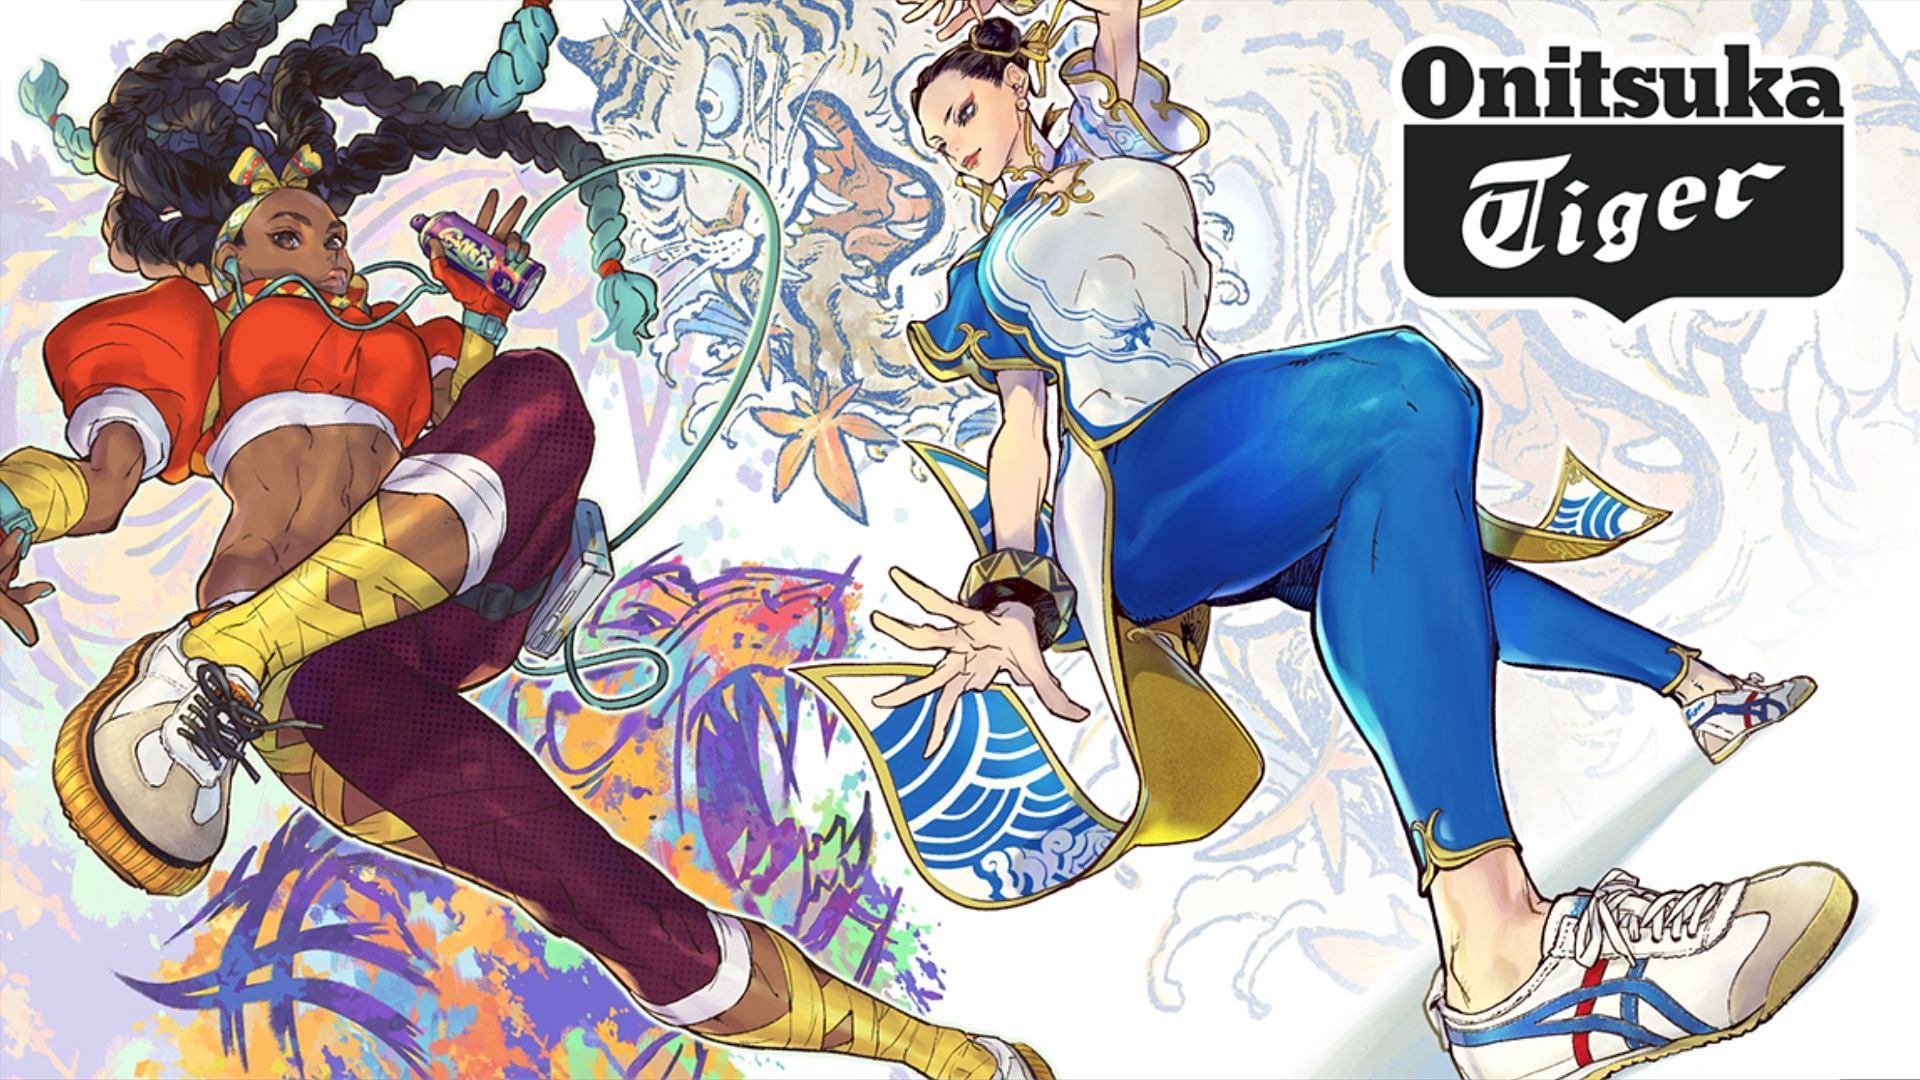 Capcom adds new Street Fighter x Onitsuka Tiger collaboration-themed cosmetics in Street Fighter 6 (Image via Capcom)